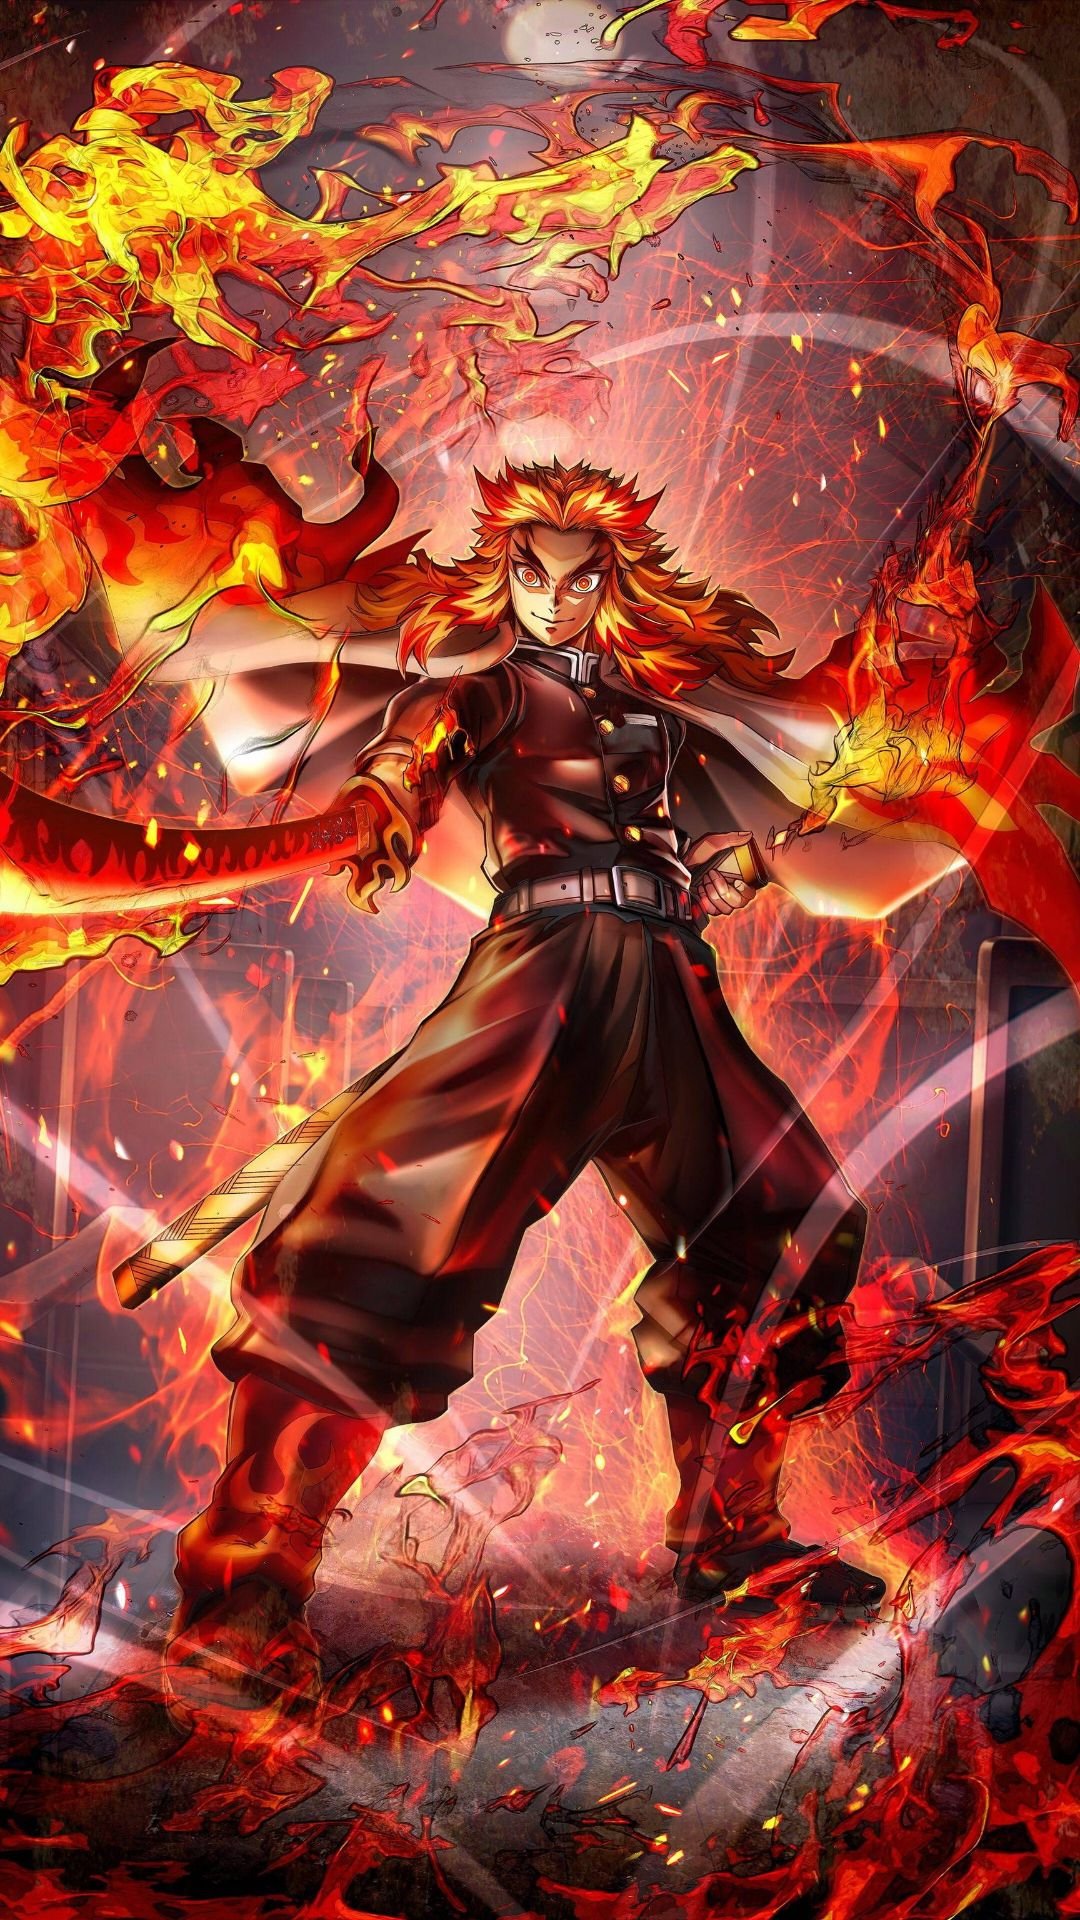 40 Most Beautiful Demon Slayer Wallpapers for Mobile